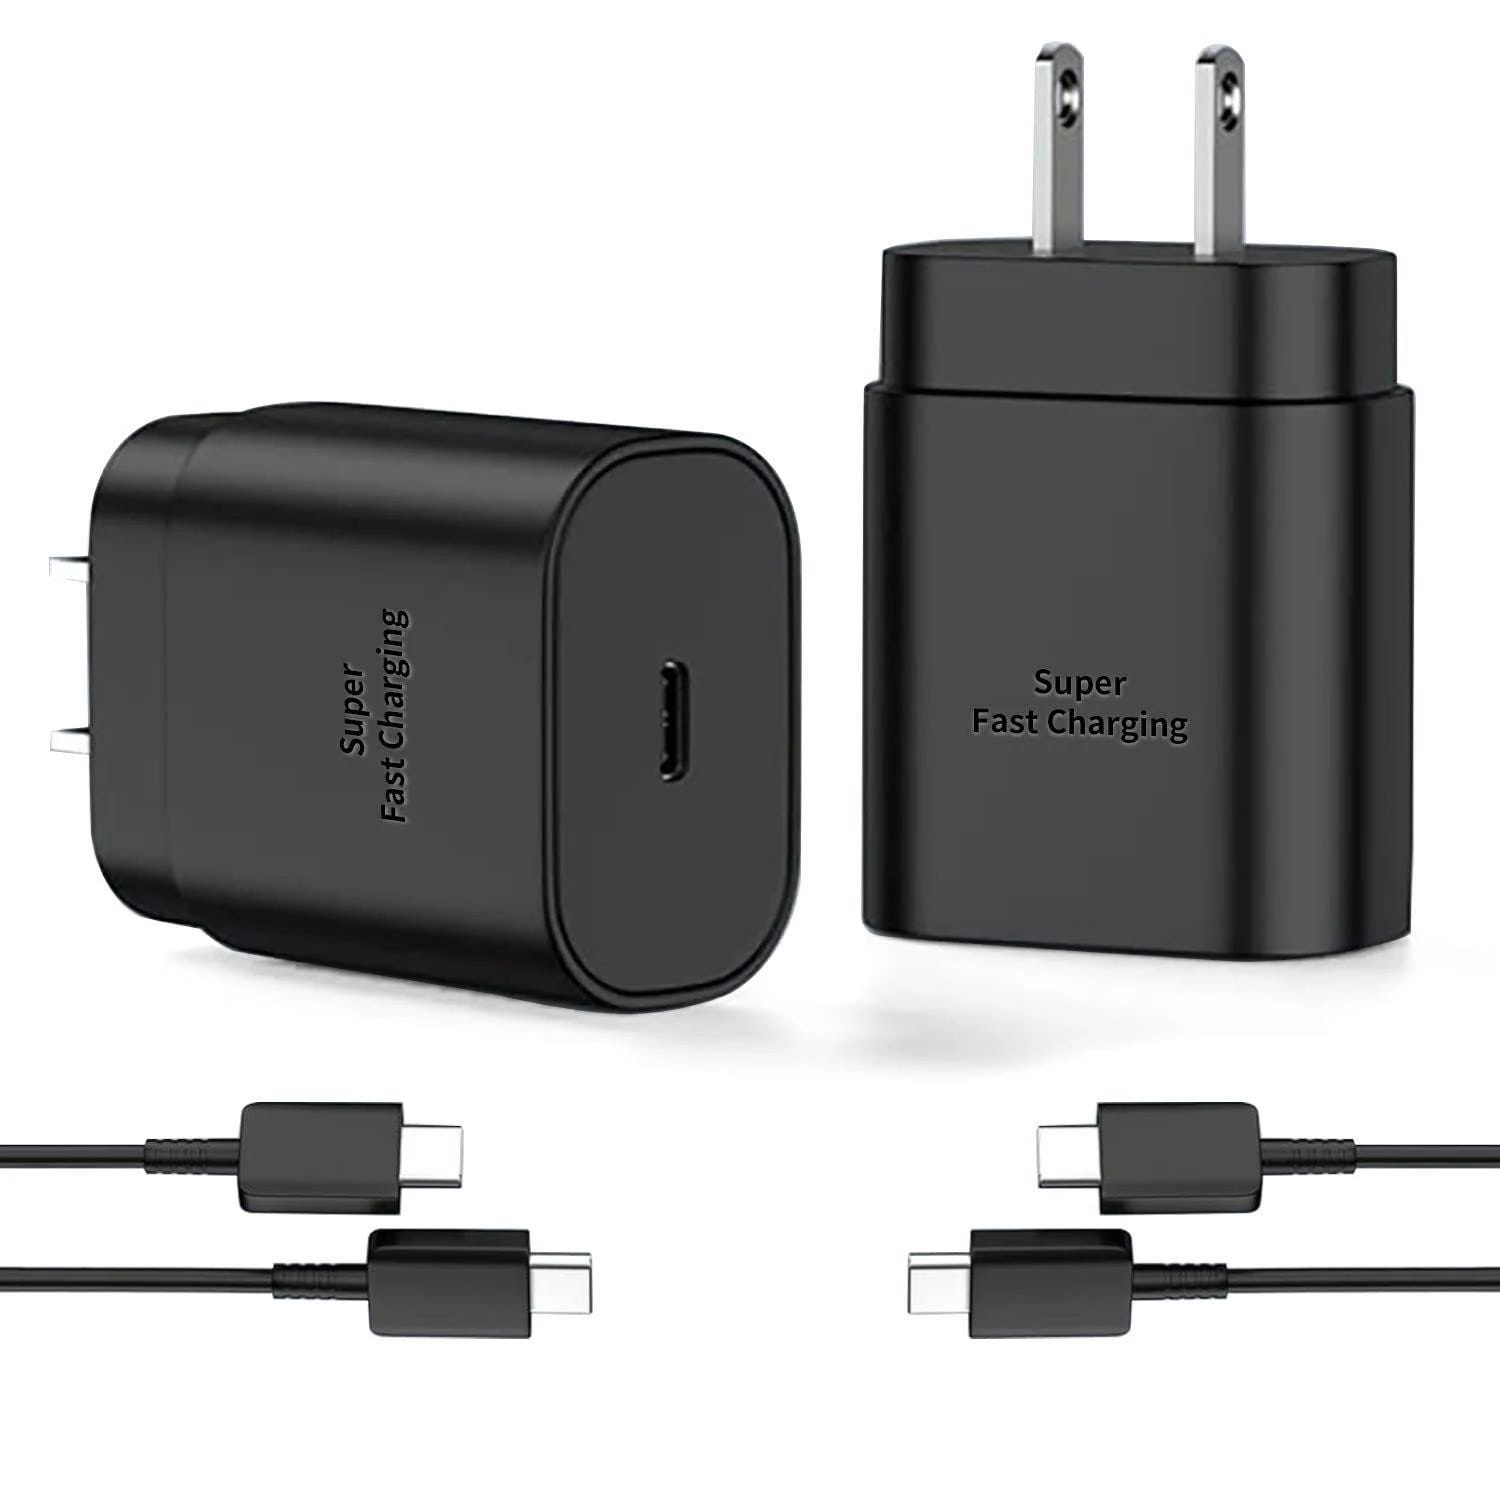 Super Fast Type C Charger 2 Pack (Samsung Galaxy S22) for Improved Charging Speed | Image